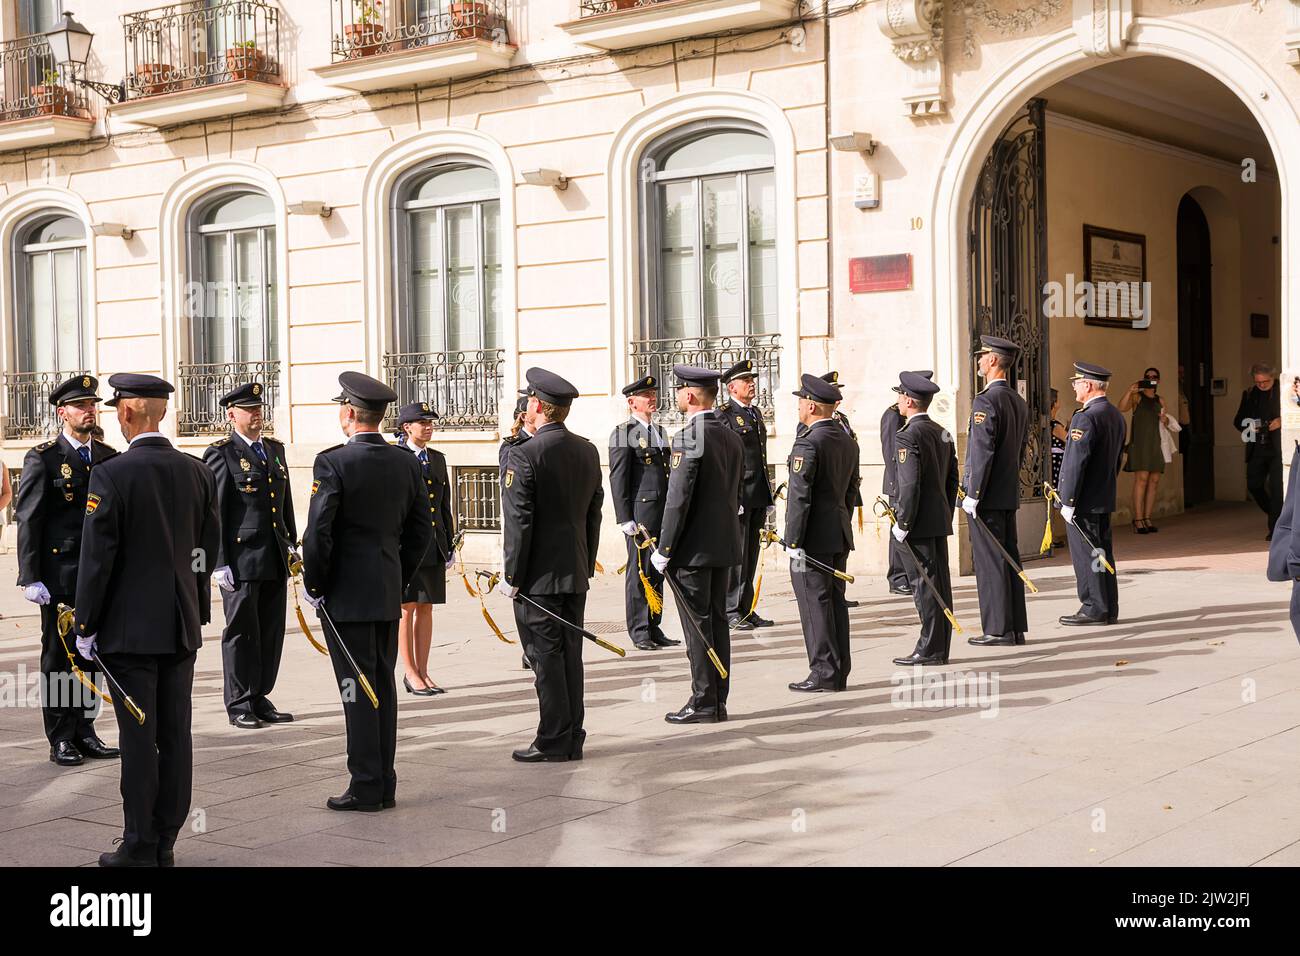 Alcala de Henares, Spain - June 18, 2022: Military honor picket at the exit of the newlyweds in Cervantes square in Alcala de Henares Stock Photo